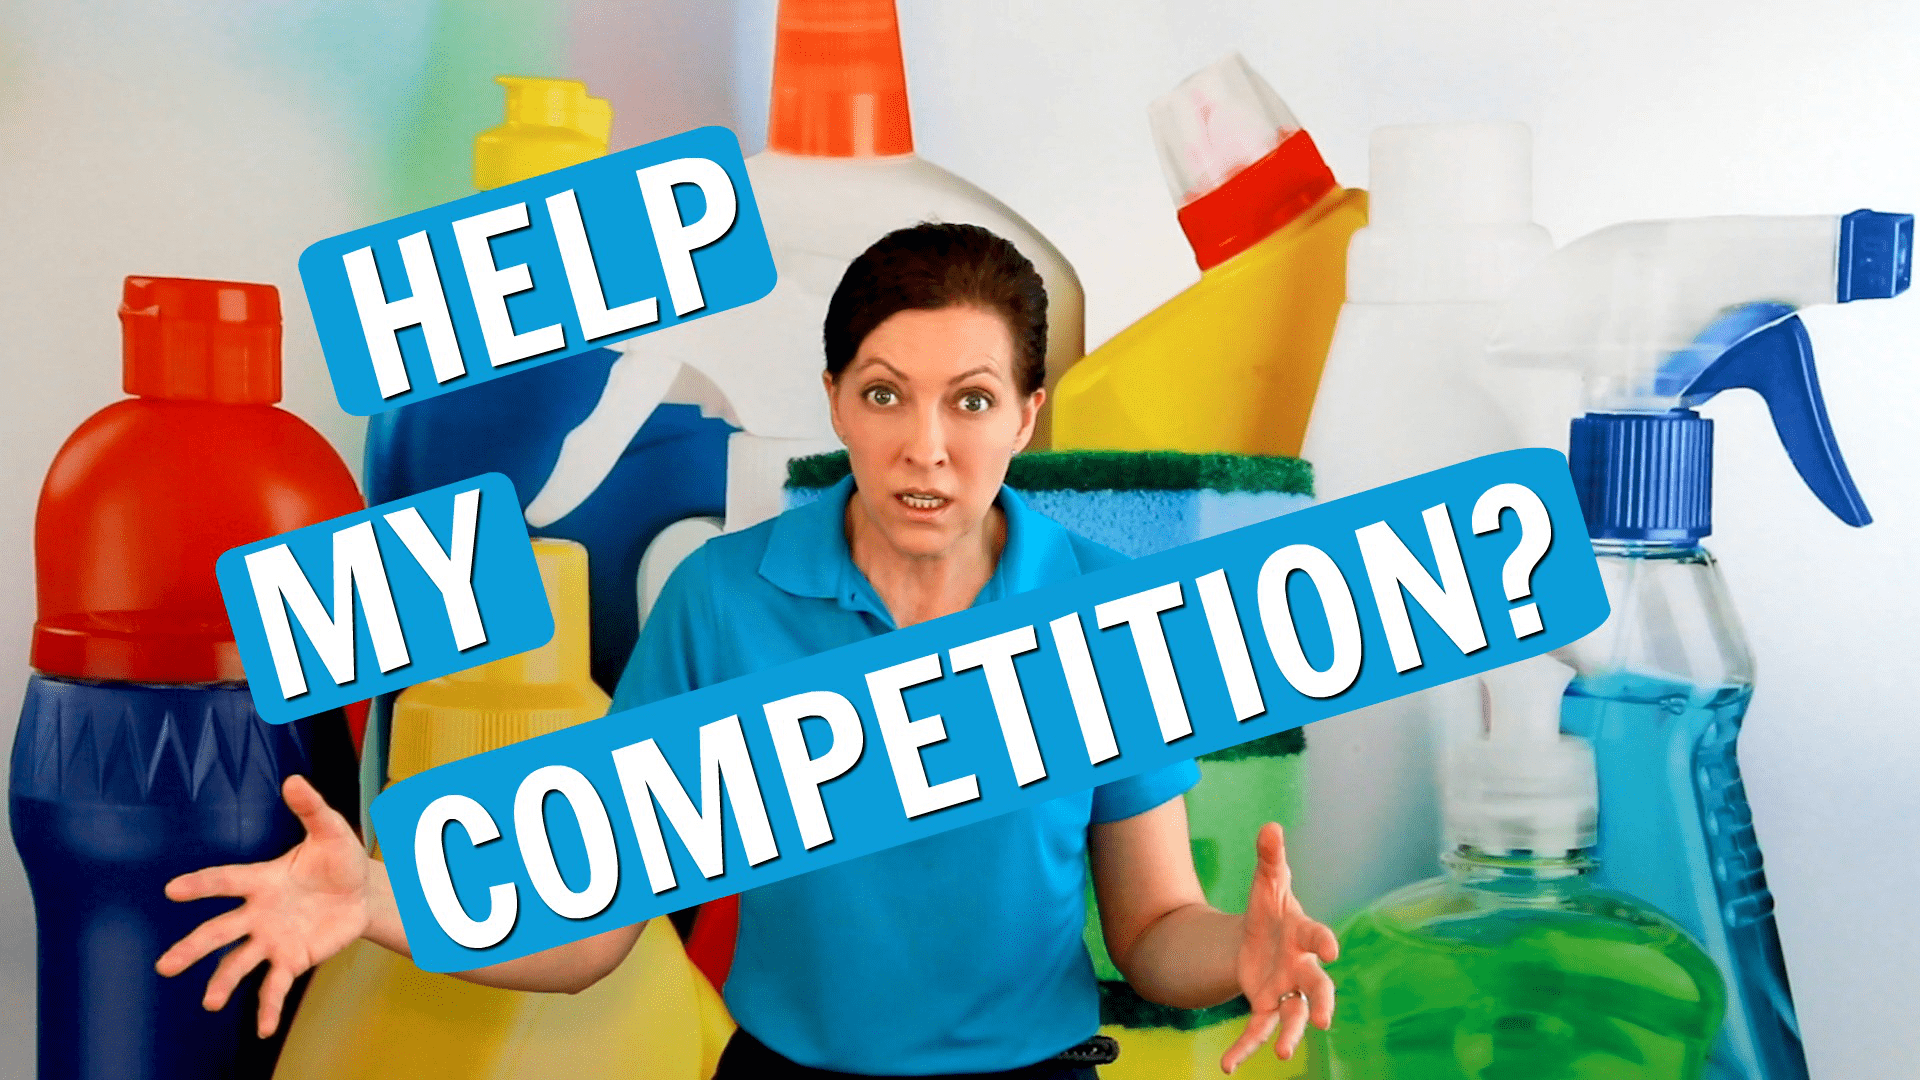 Help Your Competition, Savvy Cleaner